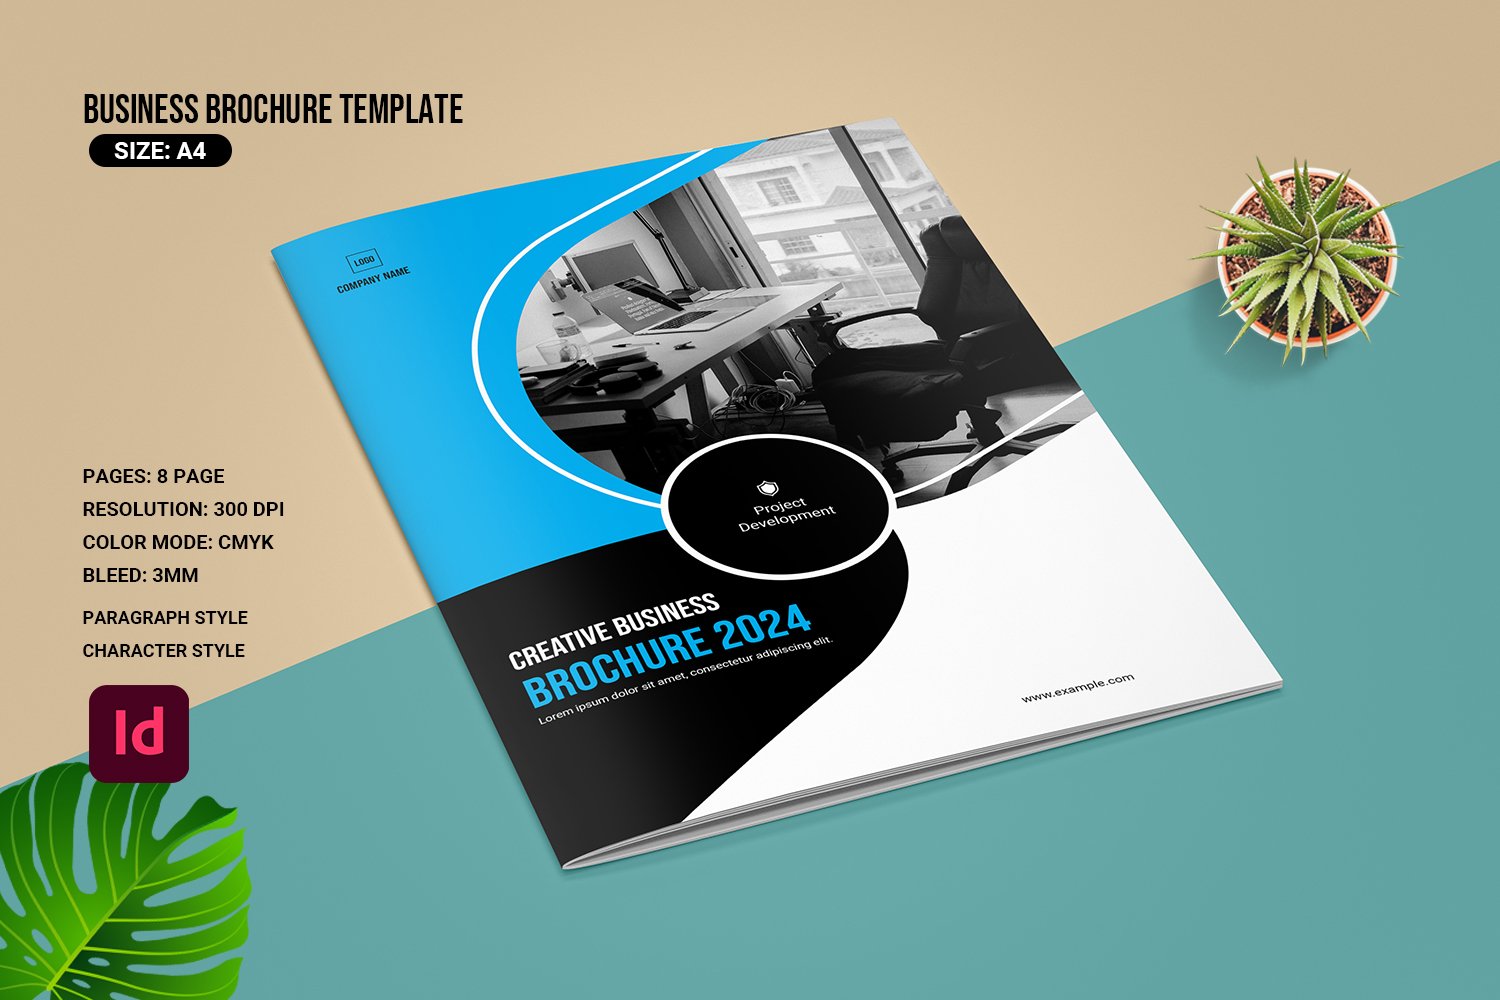 Business Brochure Template cover image.